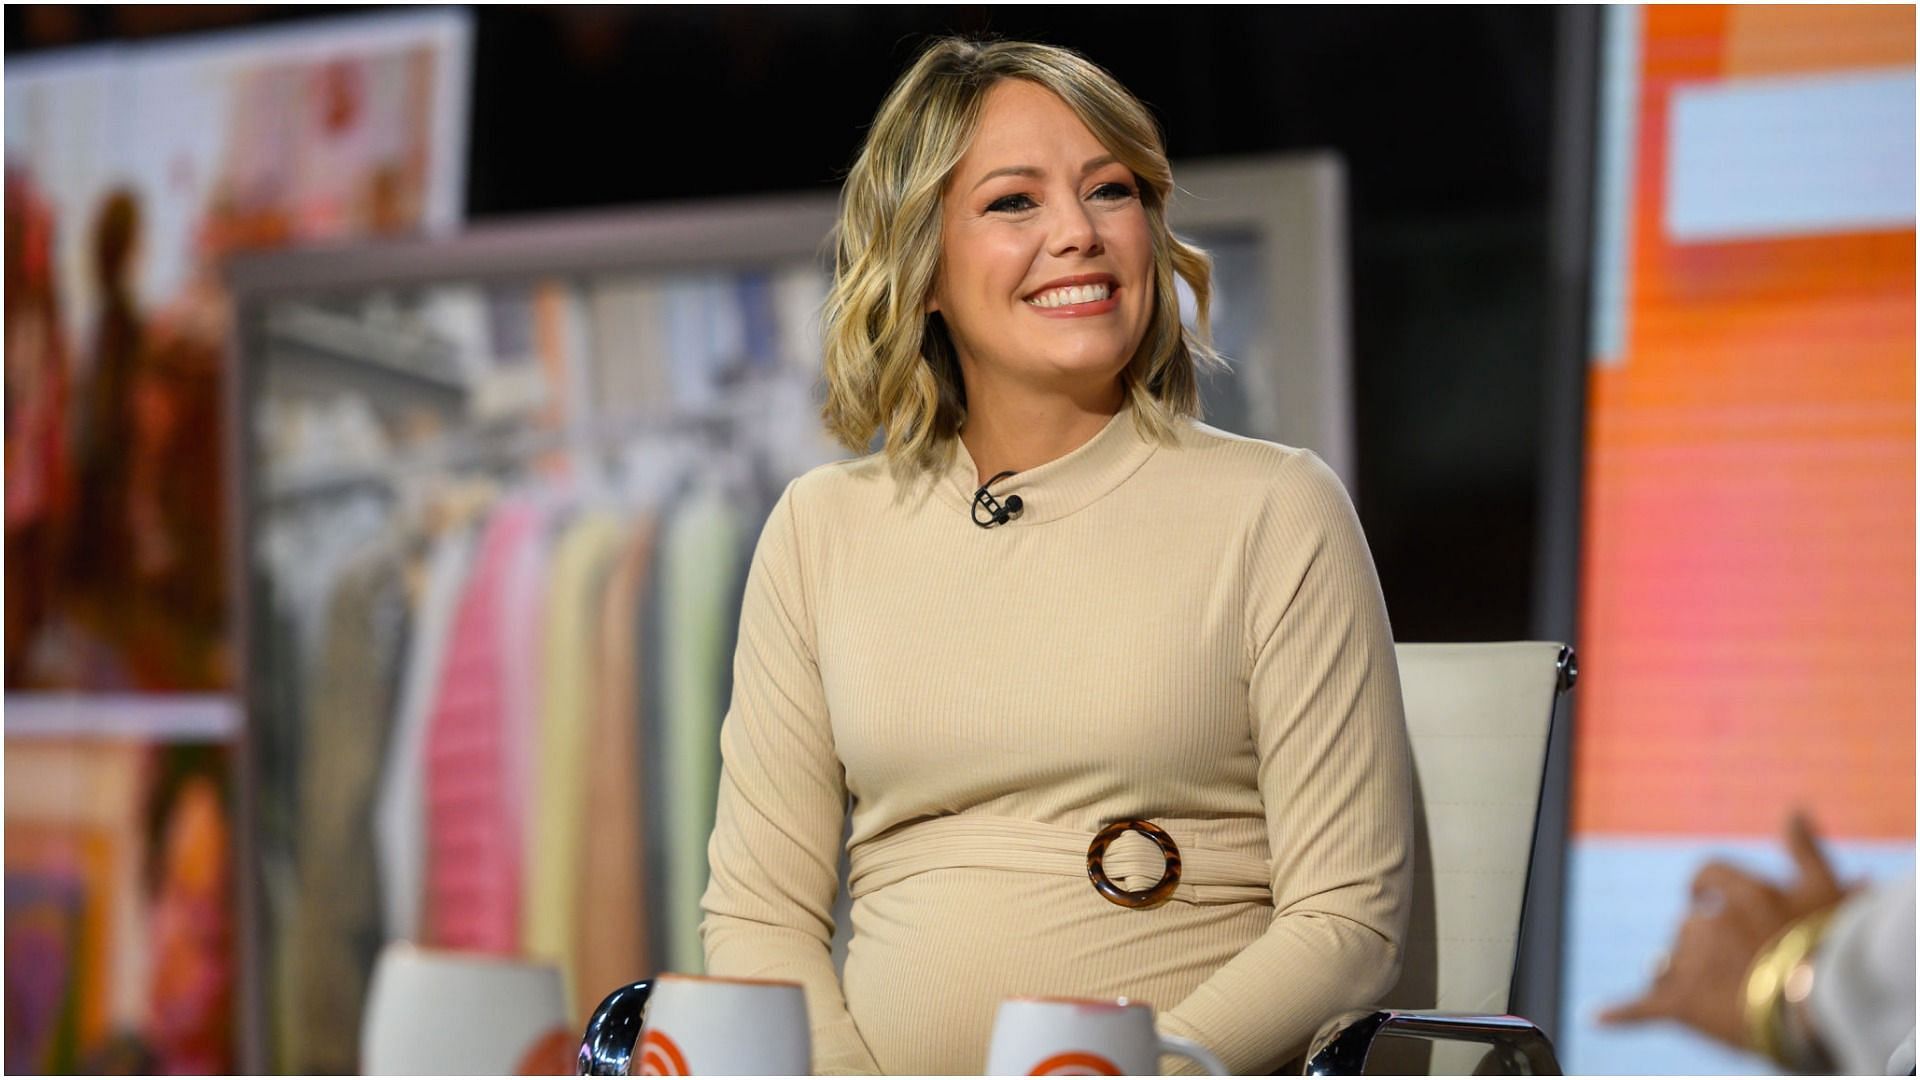 Dylan Dreyer appeared as a weather correspondent on Today on weekdays (Image via Nathan Congleton/Getty Images)